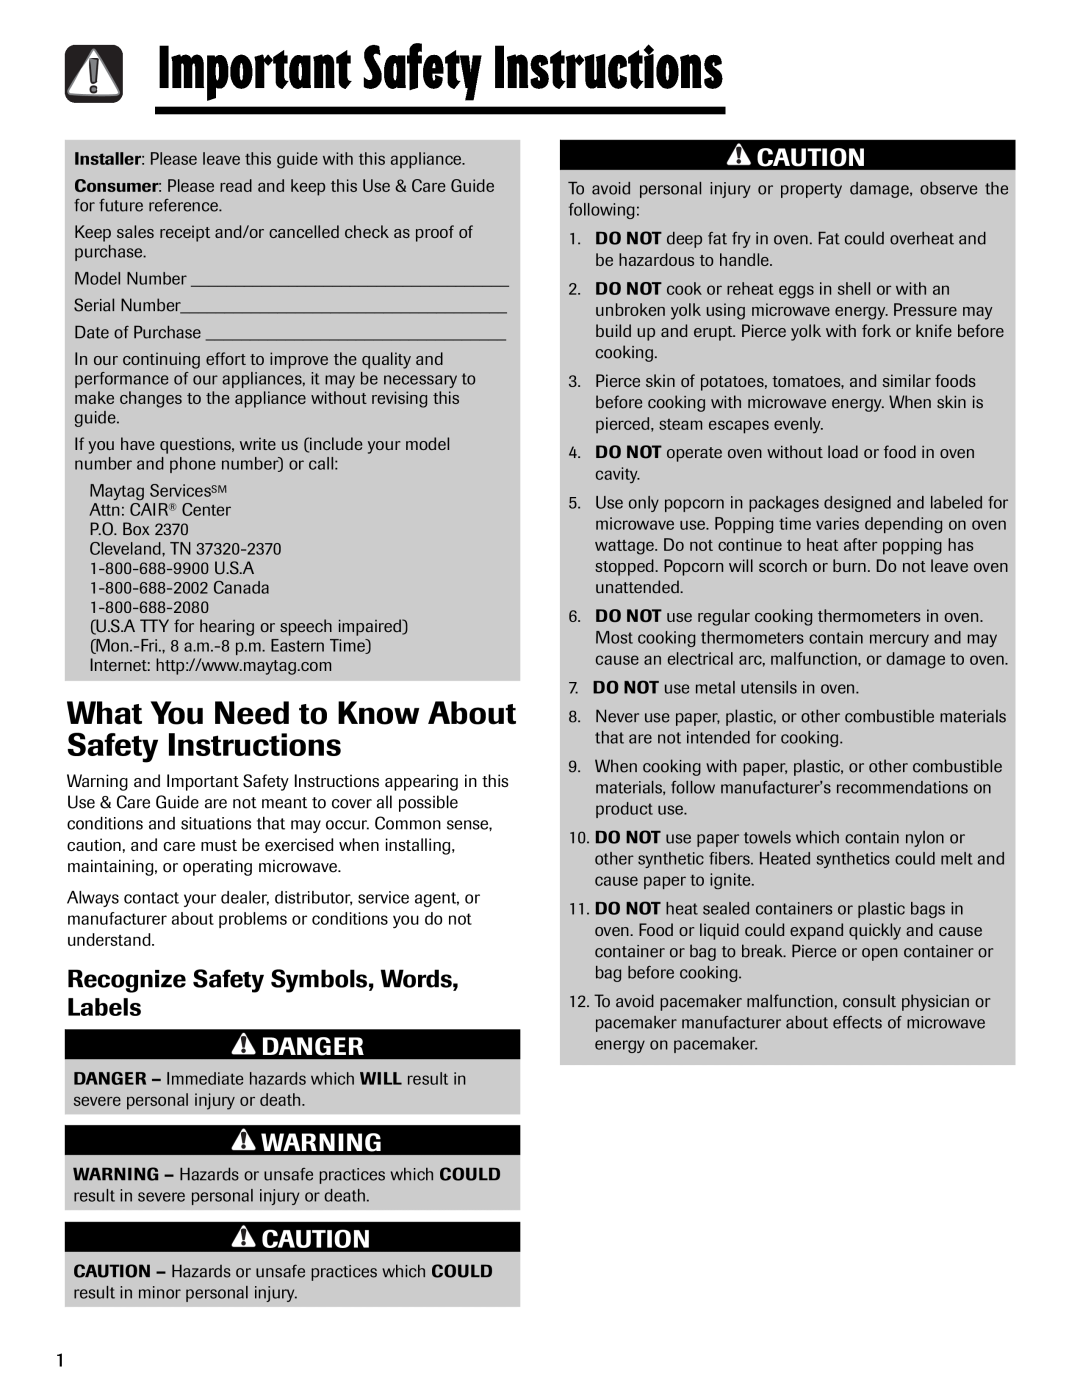 Maytag MMV1153AA Important Safety Instructions, What You Need to Know About Safety Instructions, Danger 